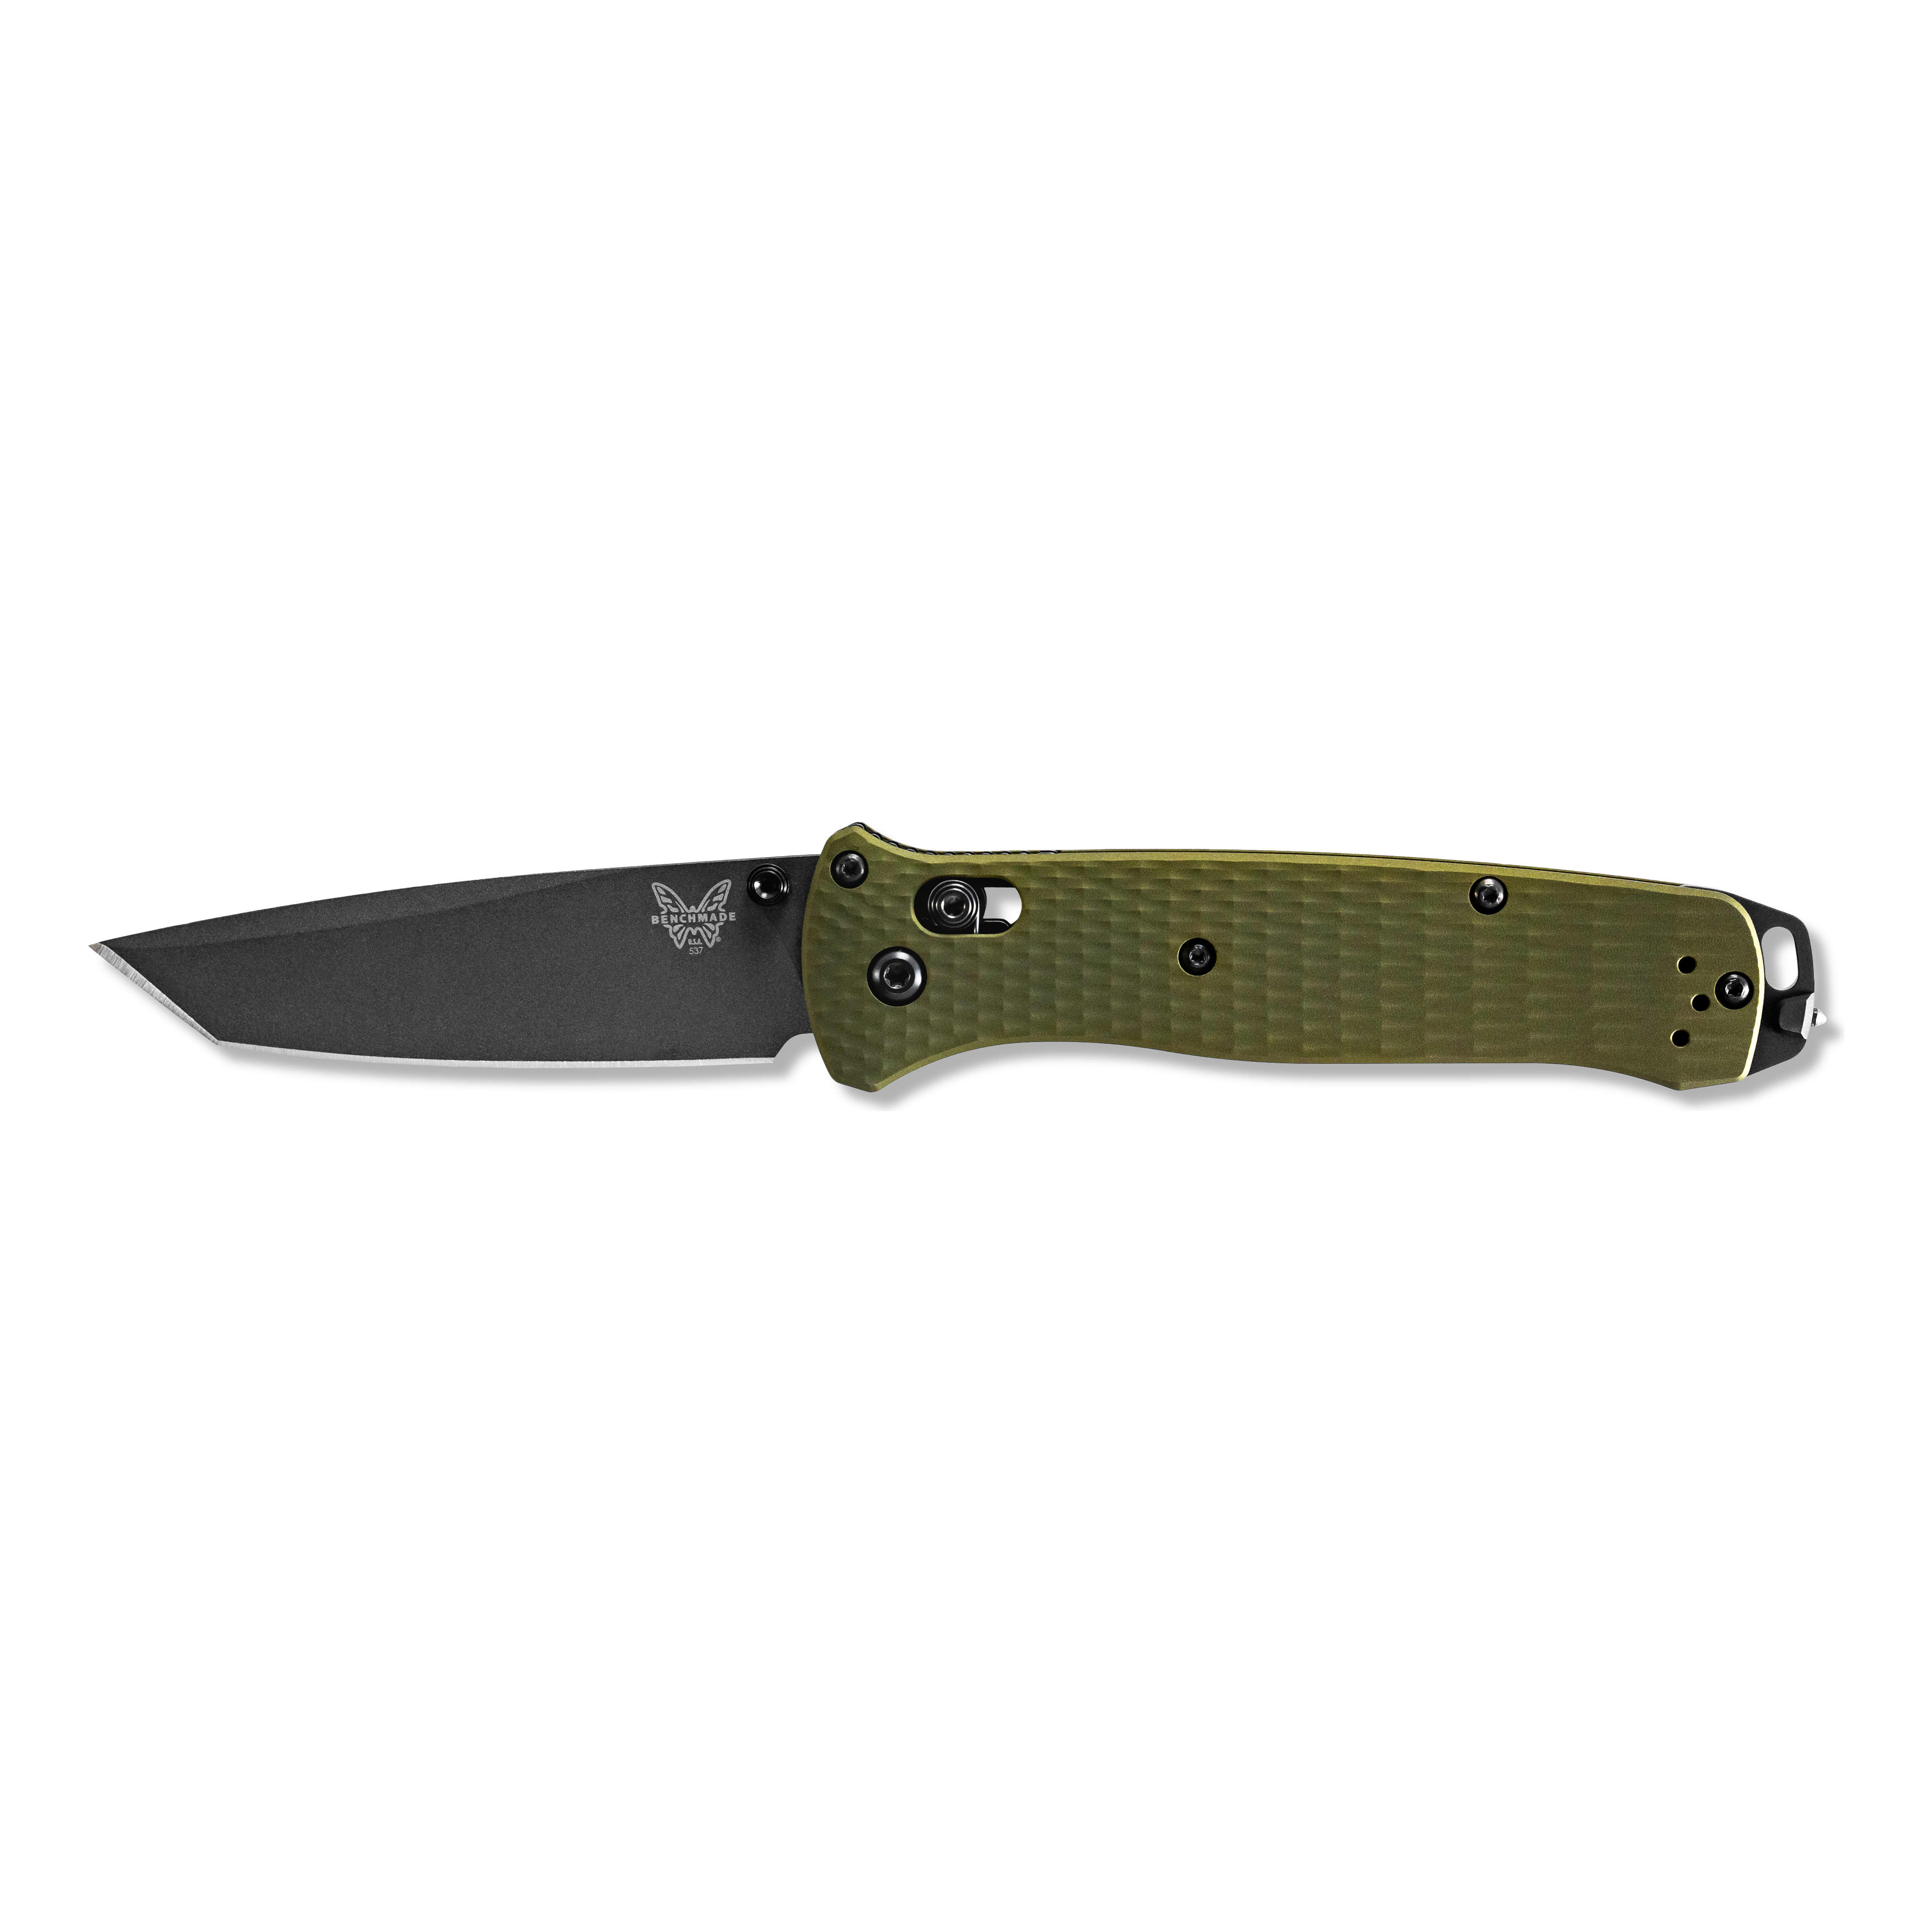 Benchmade® 537GY-1 Bailout Folding Knife - Unfolded View